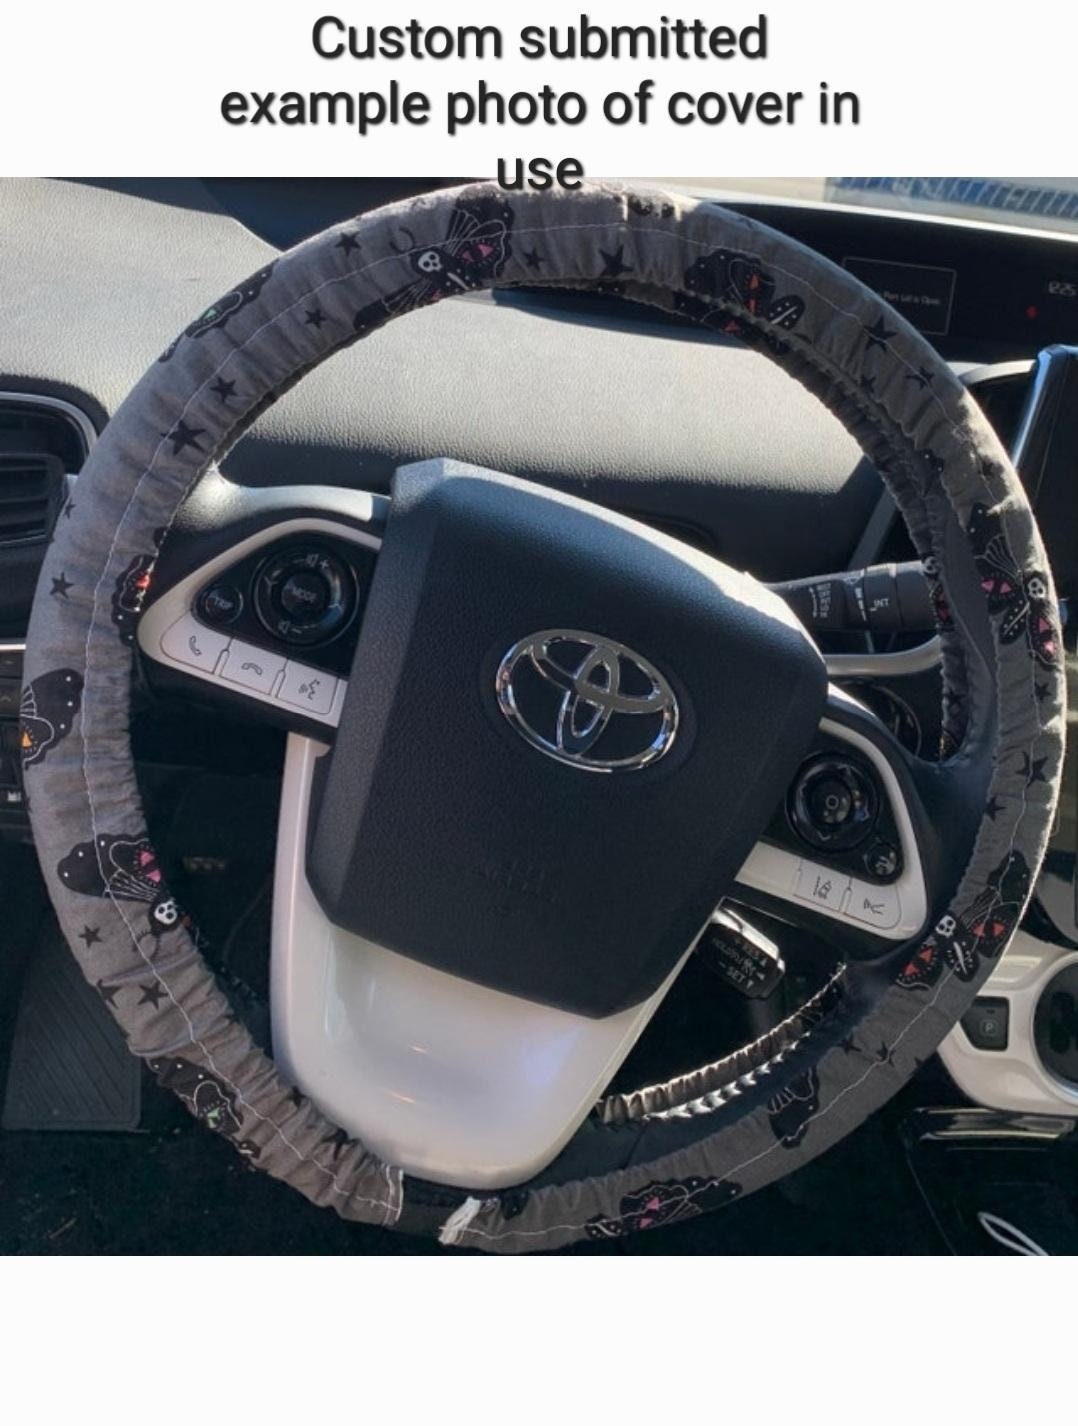 Mini Blue Floral Steering Wheel Cover - Harlow's Store and Garden Gifts